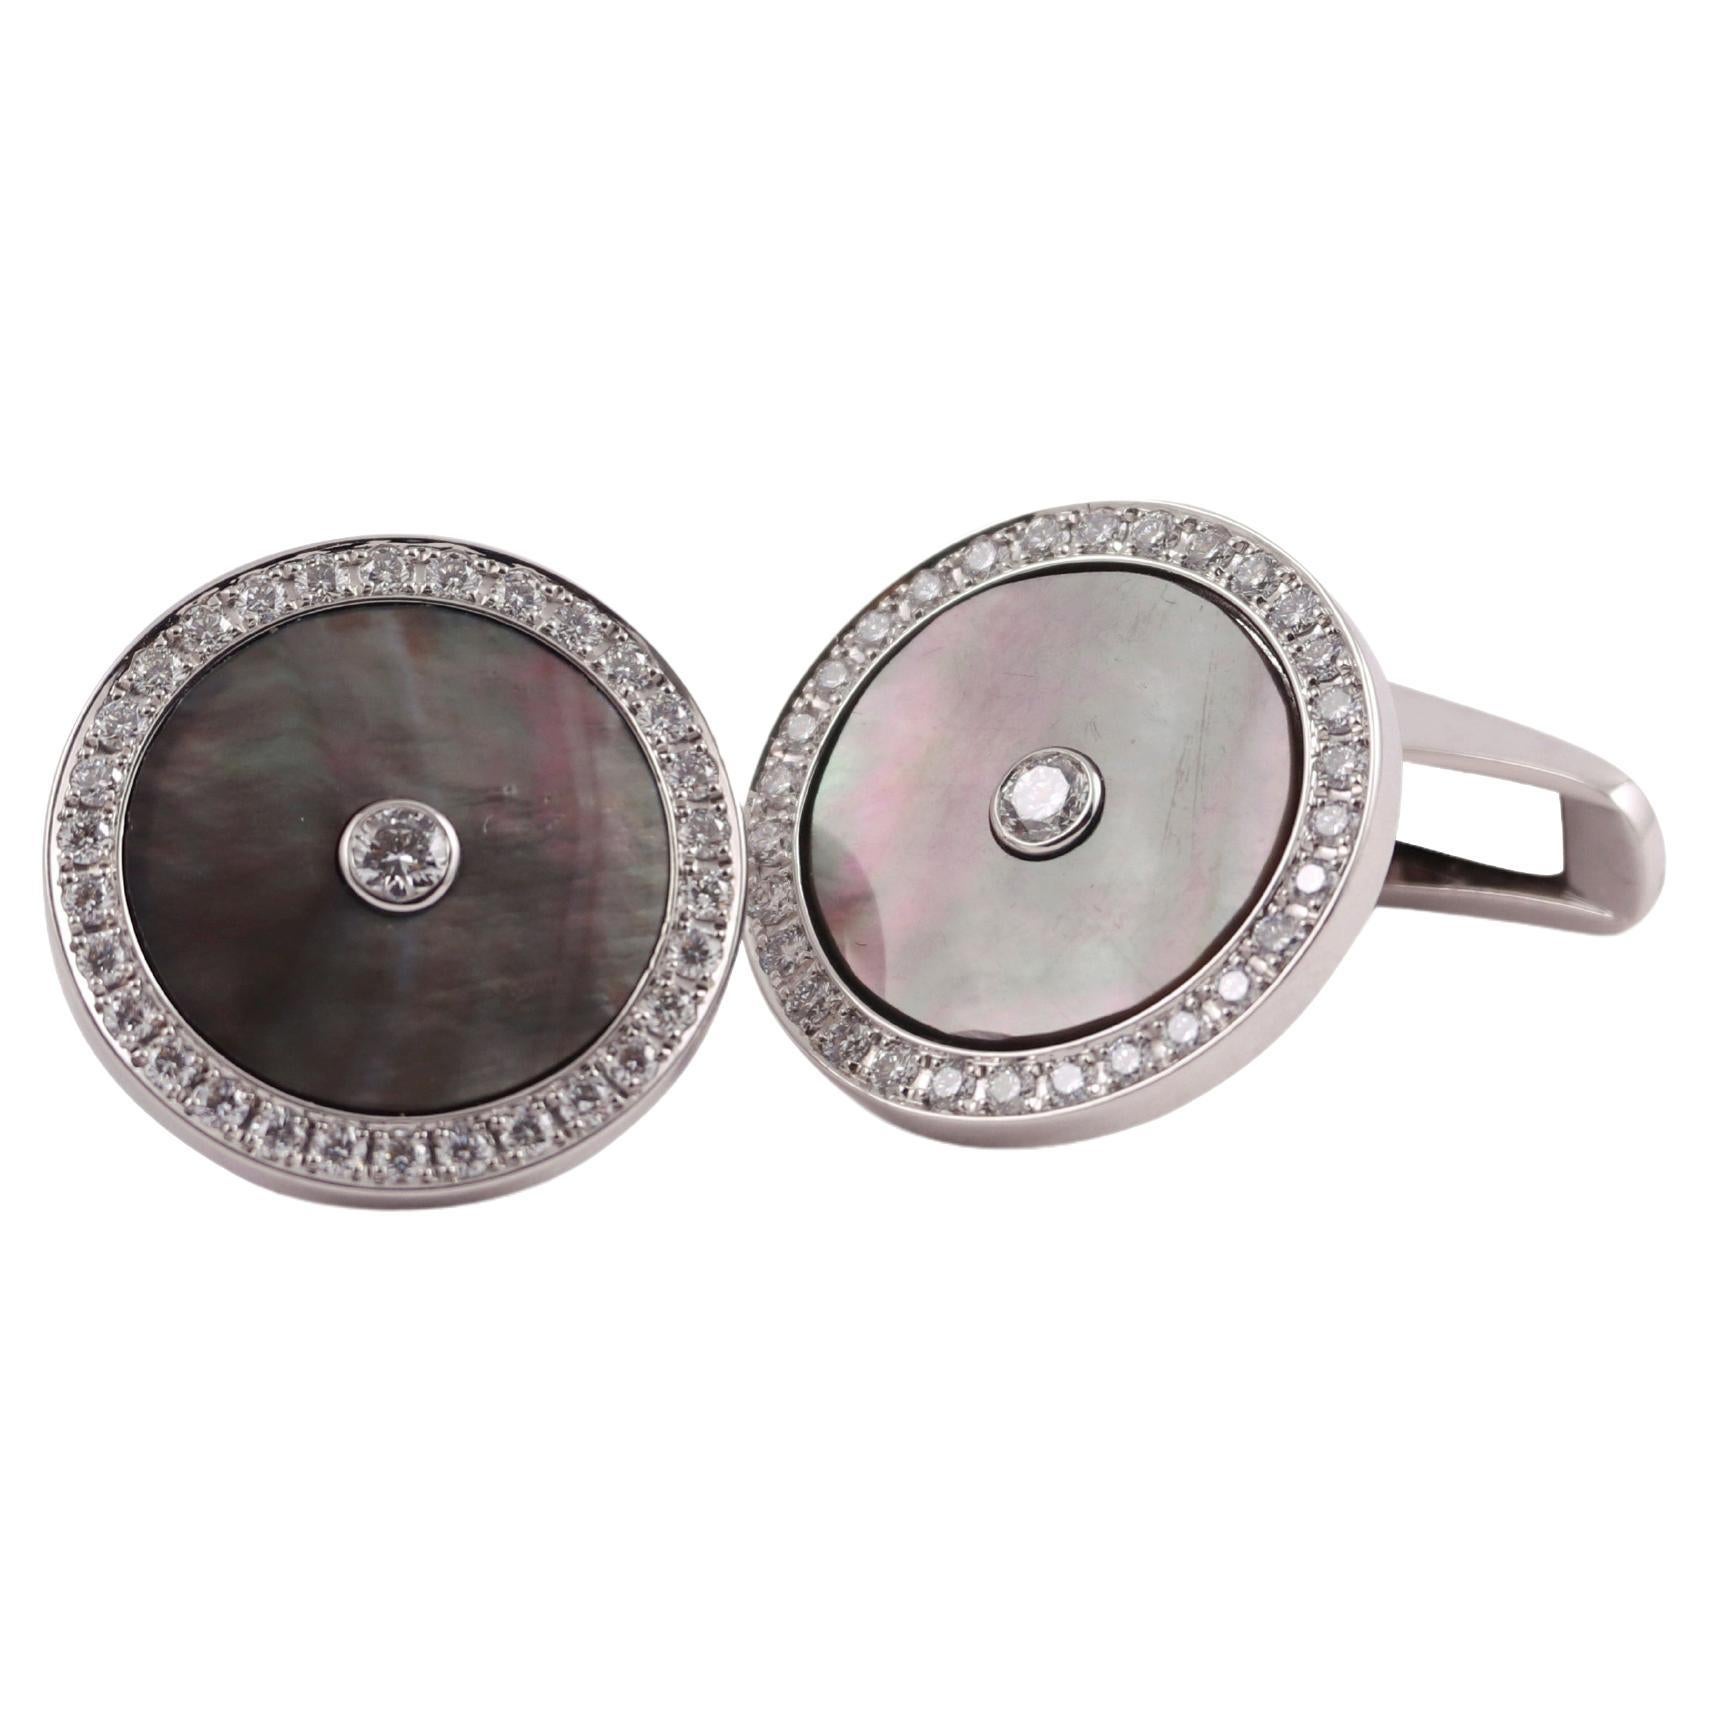 Round Cufflinks - 18k White Gold - 62 Diamonds 0.72 ct Black Mother of Pearl For Sale